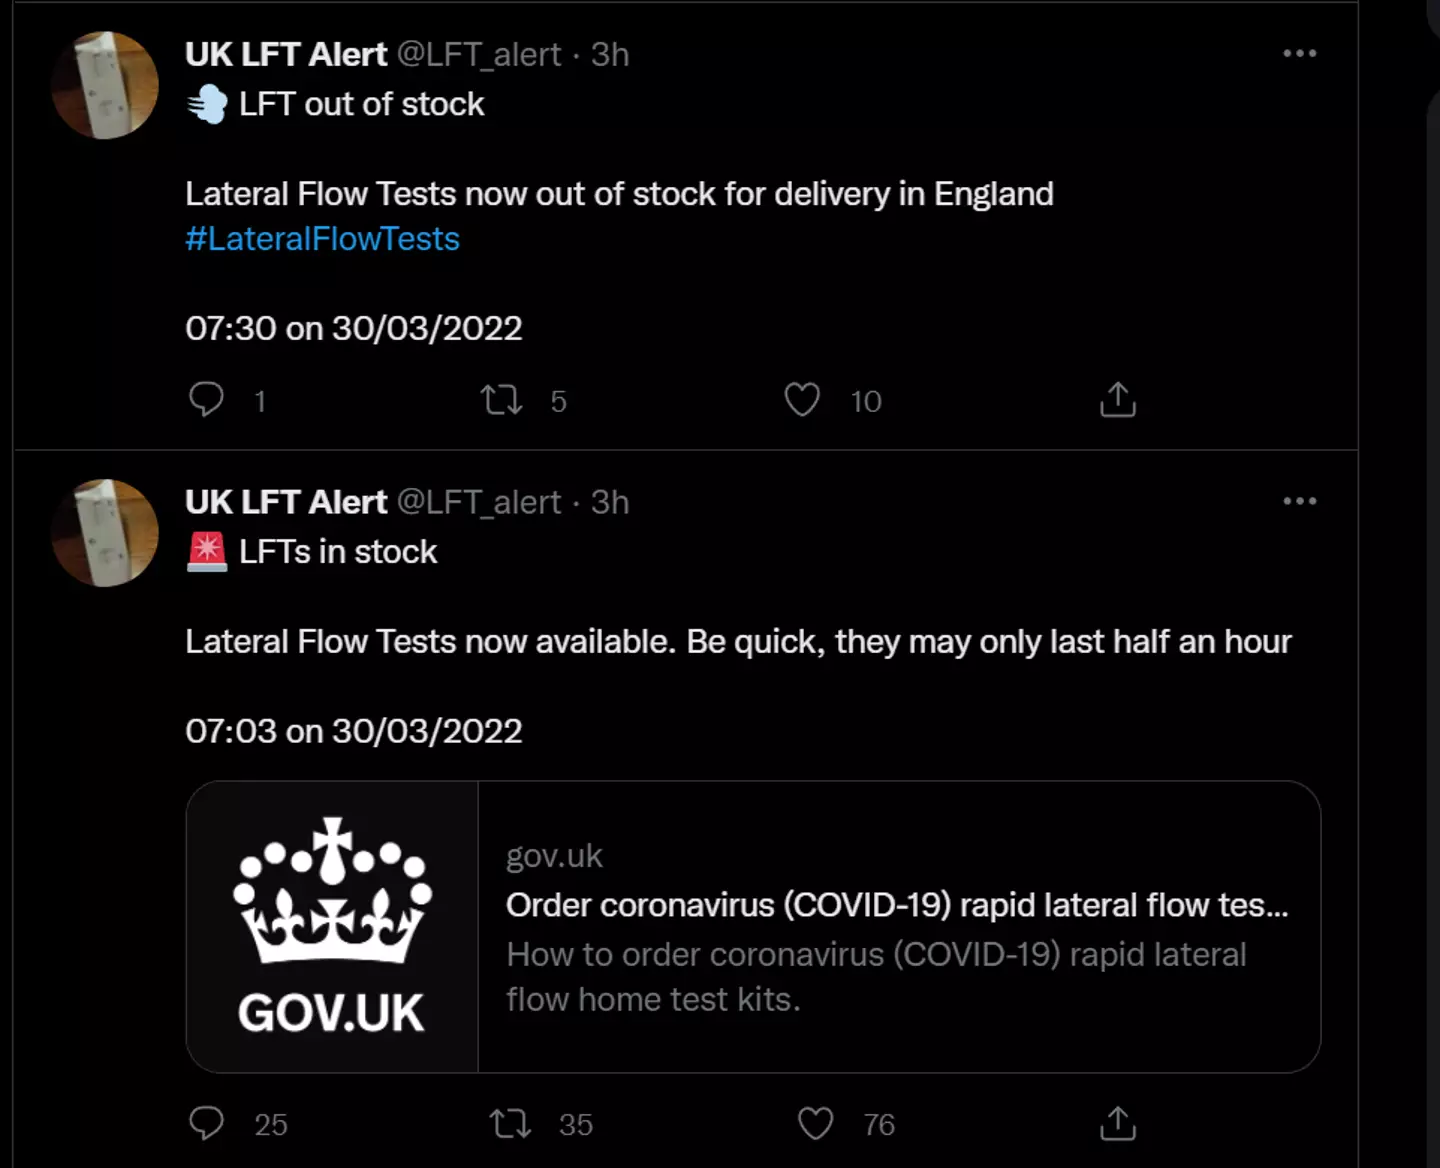 The twitter account send alerts when lateral flows are available to order (